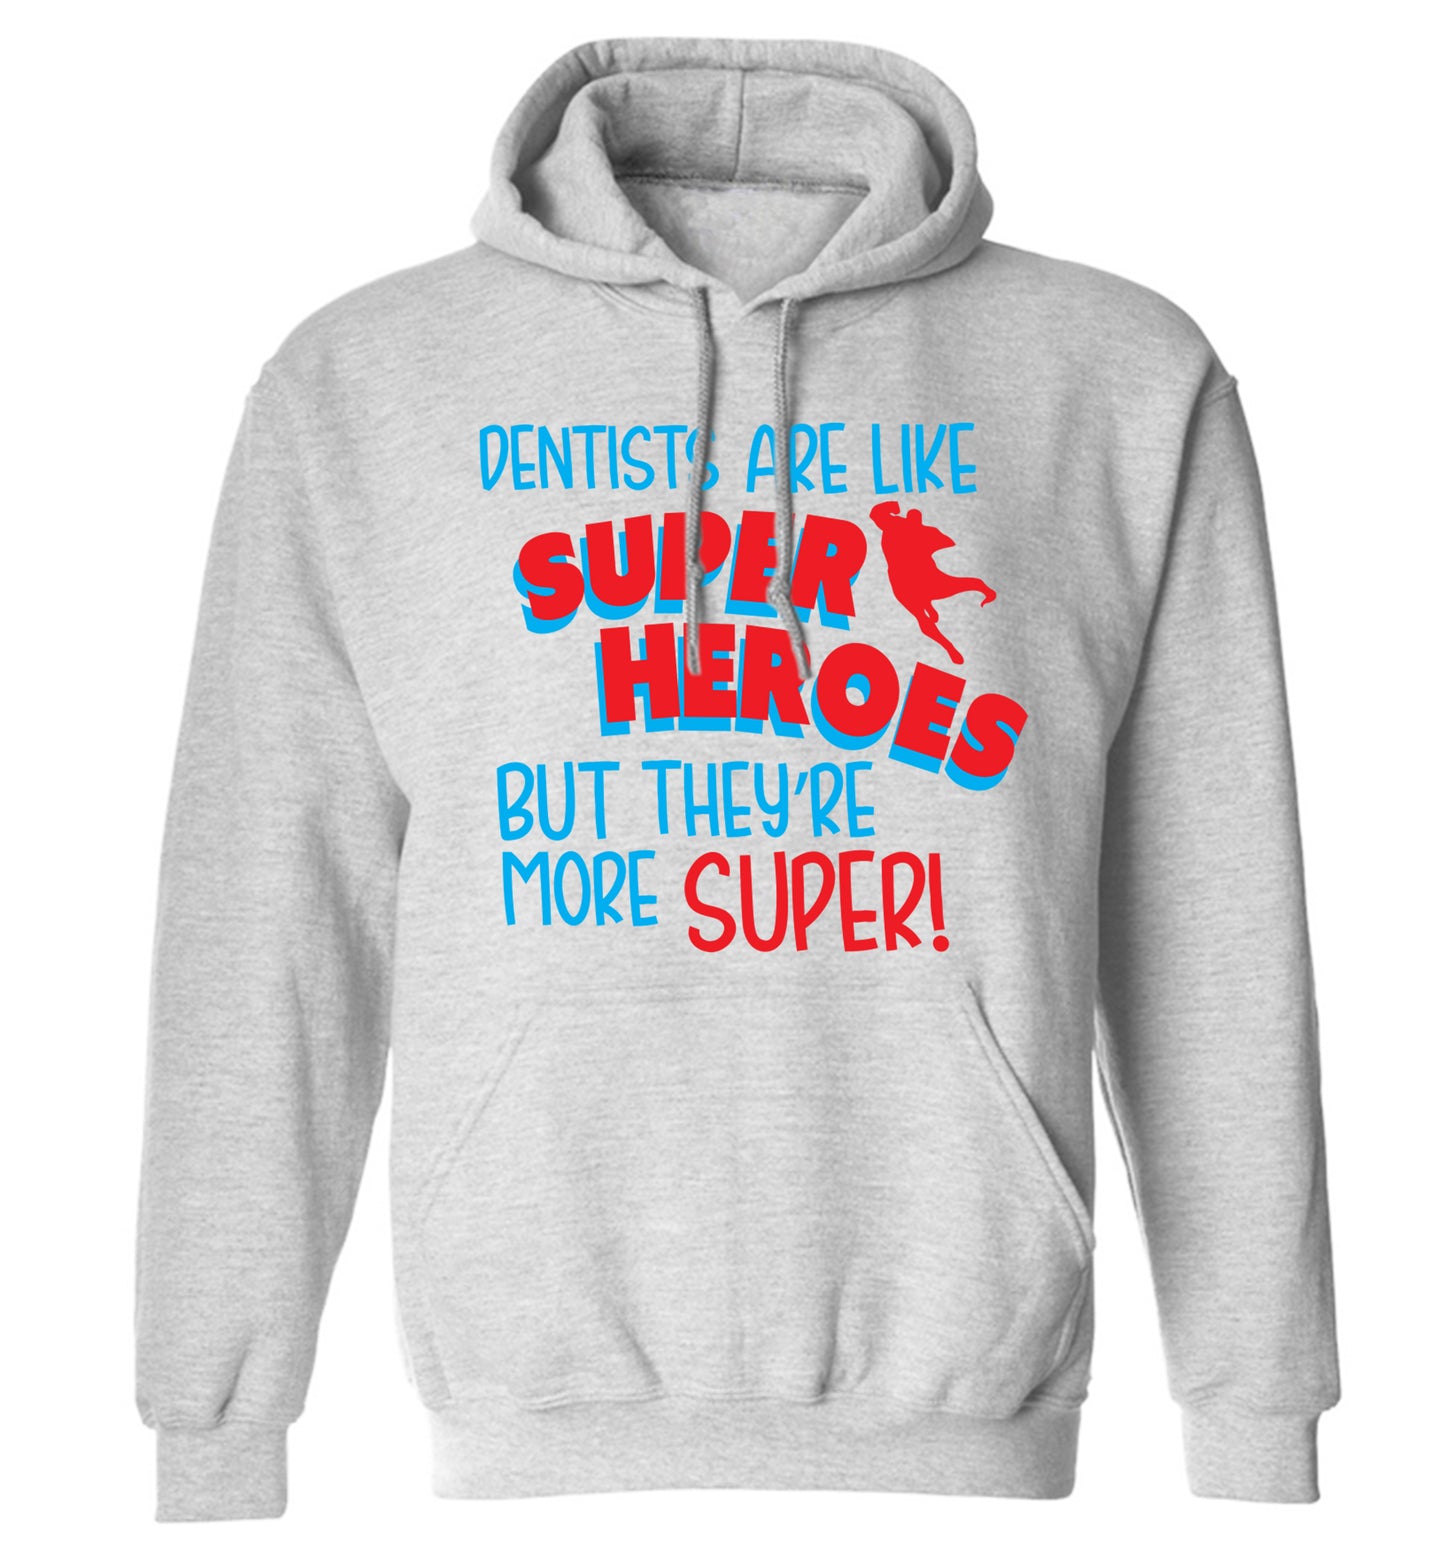 Dentists are like superheros but they're more super adults unisex grey hoodie 2XL